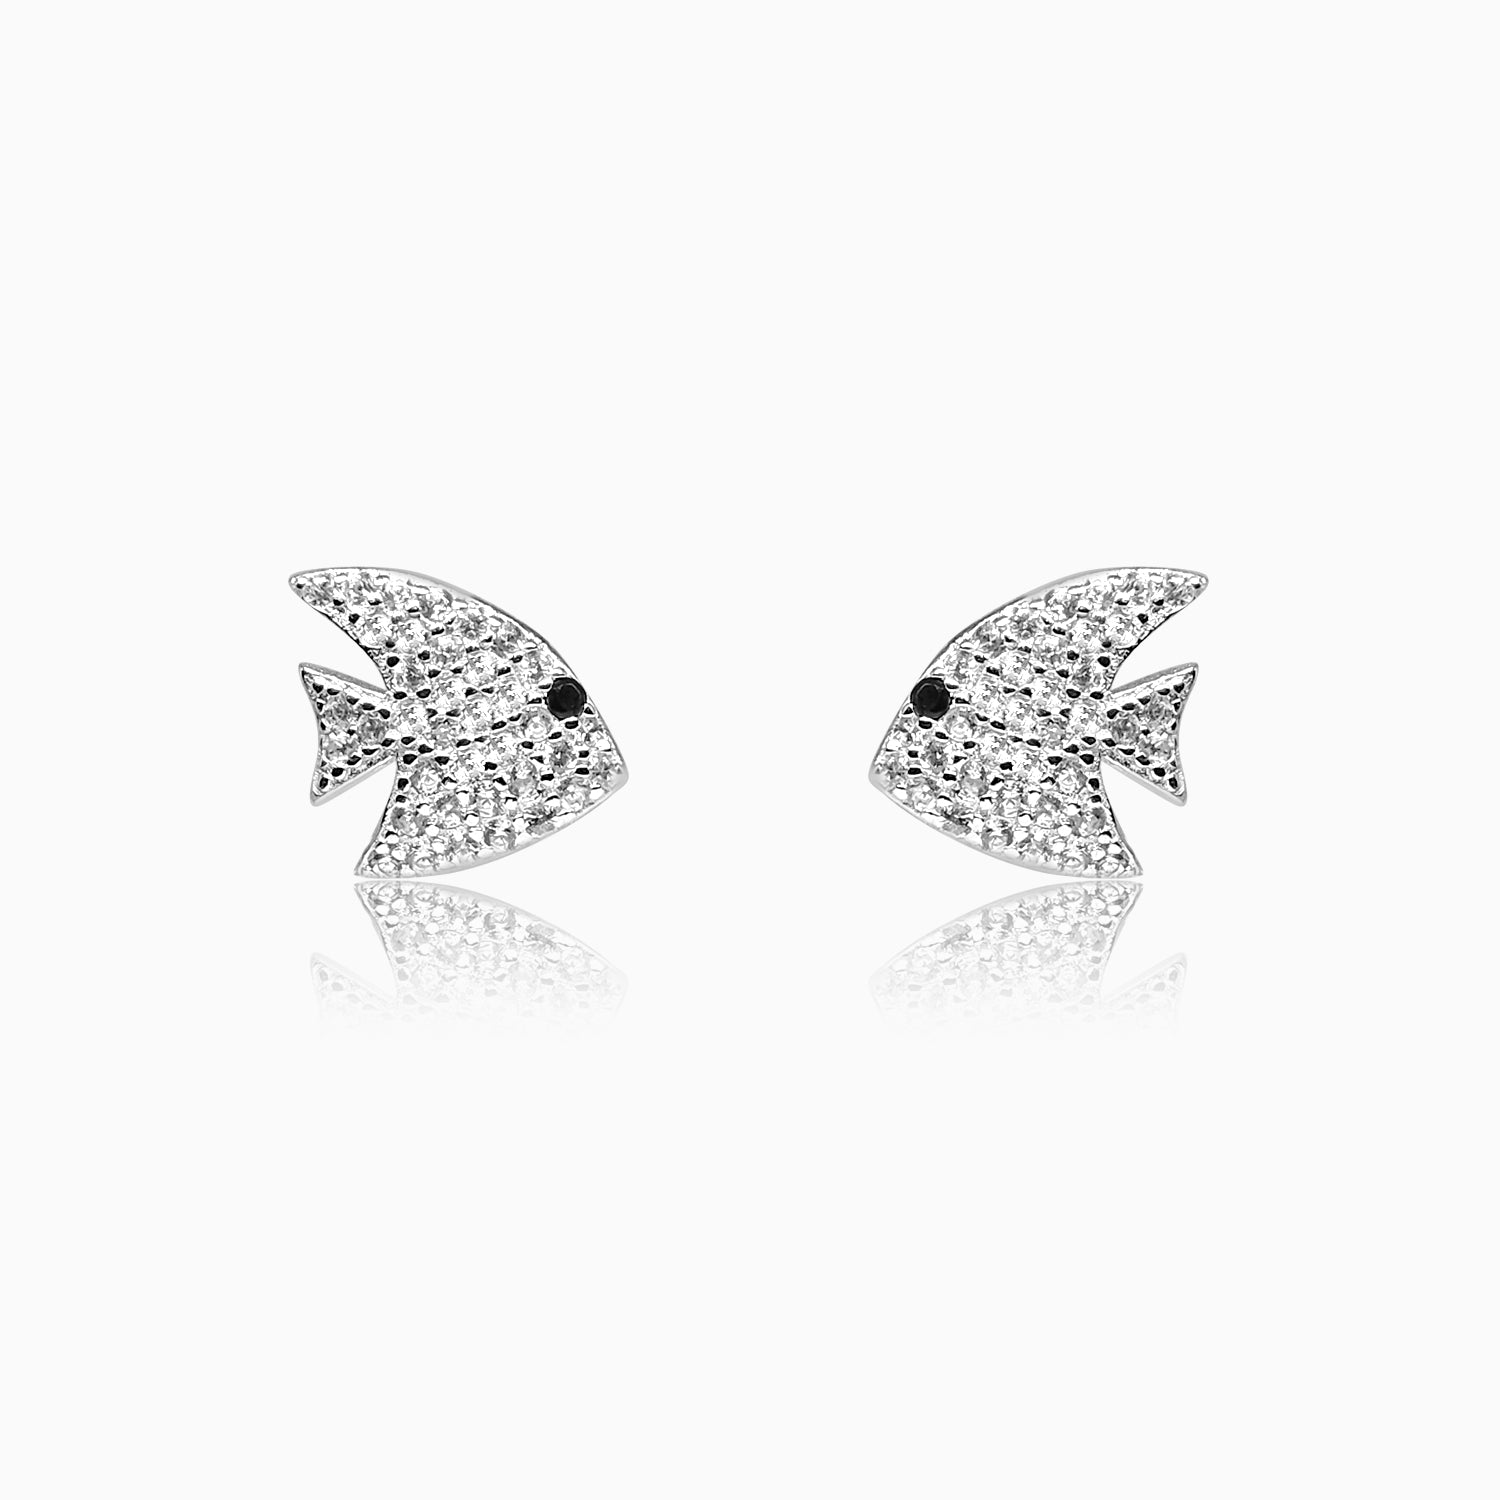 Silver Sparkling Queen Angel Fish Earrings